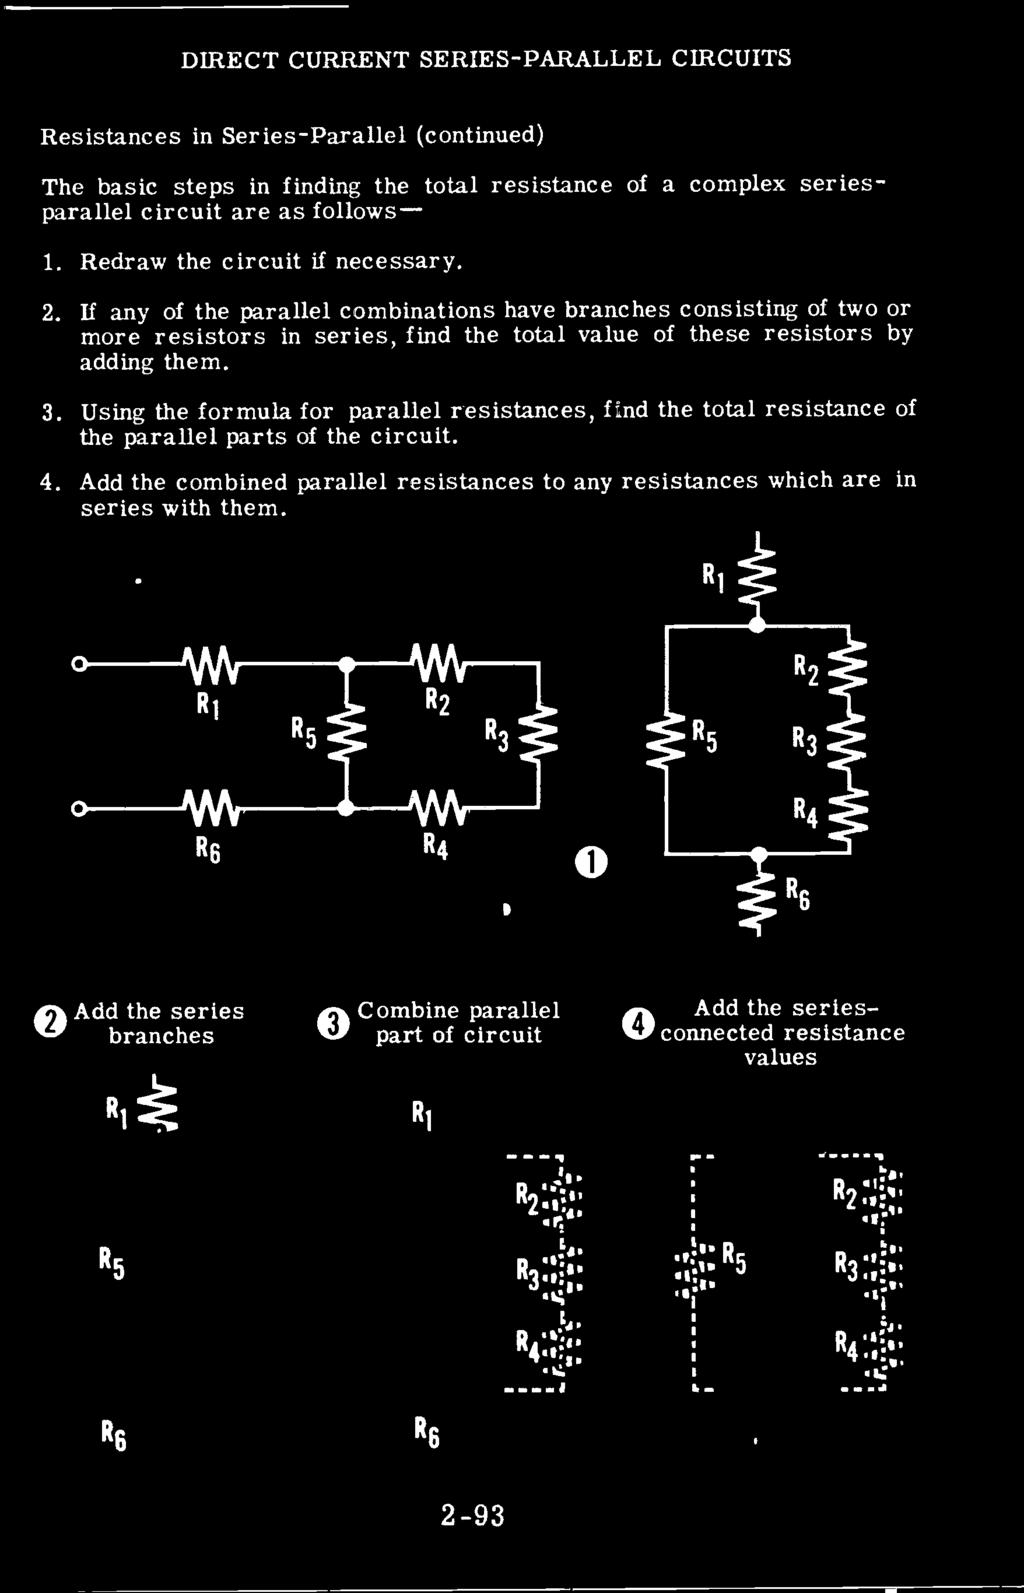 circuit. 4. Add the combined parallel resistances to any resistances which are in series with them.